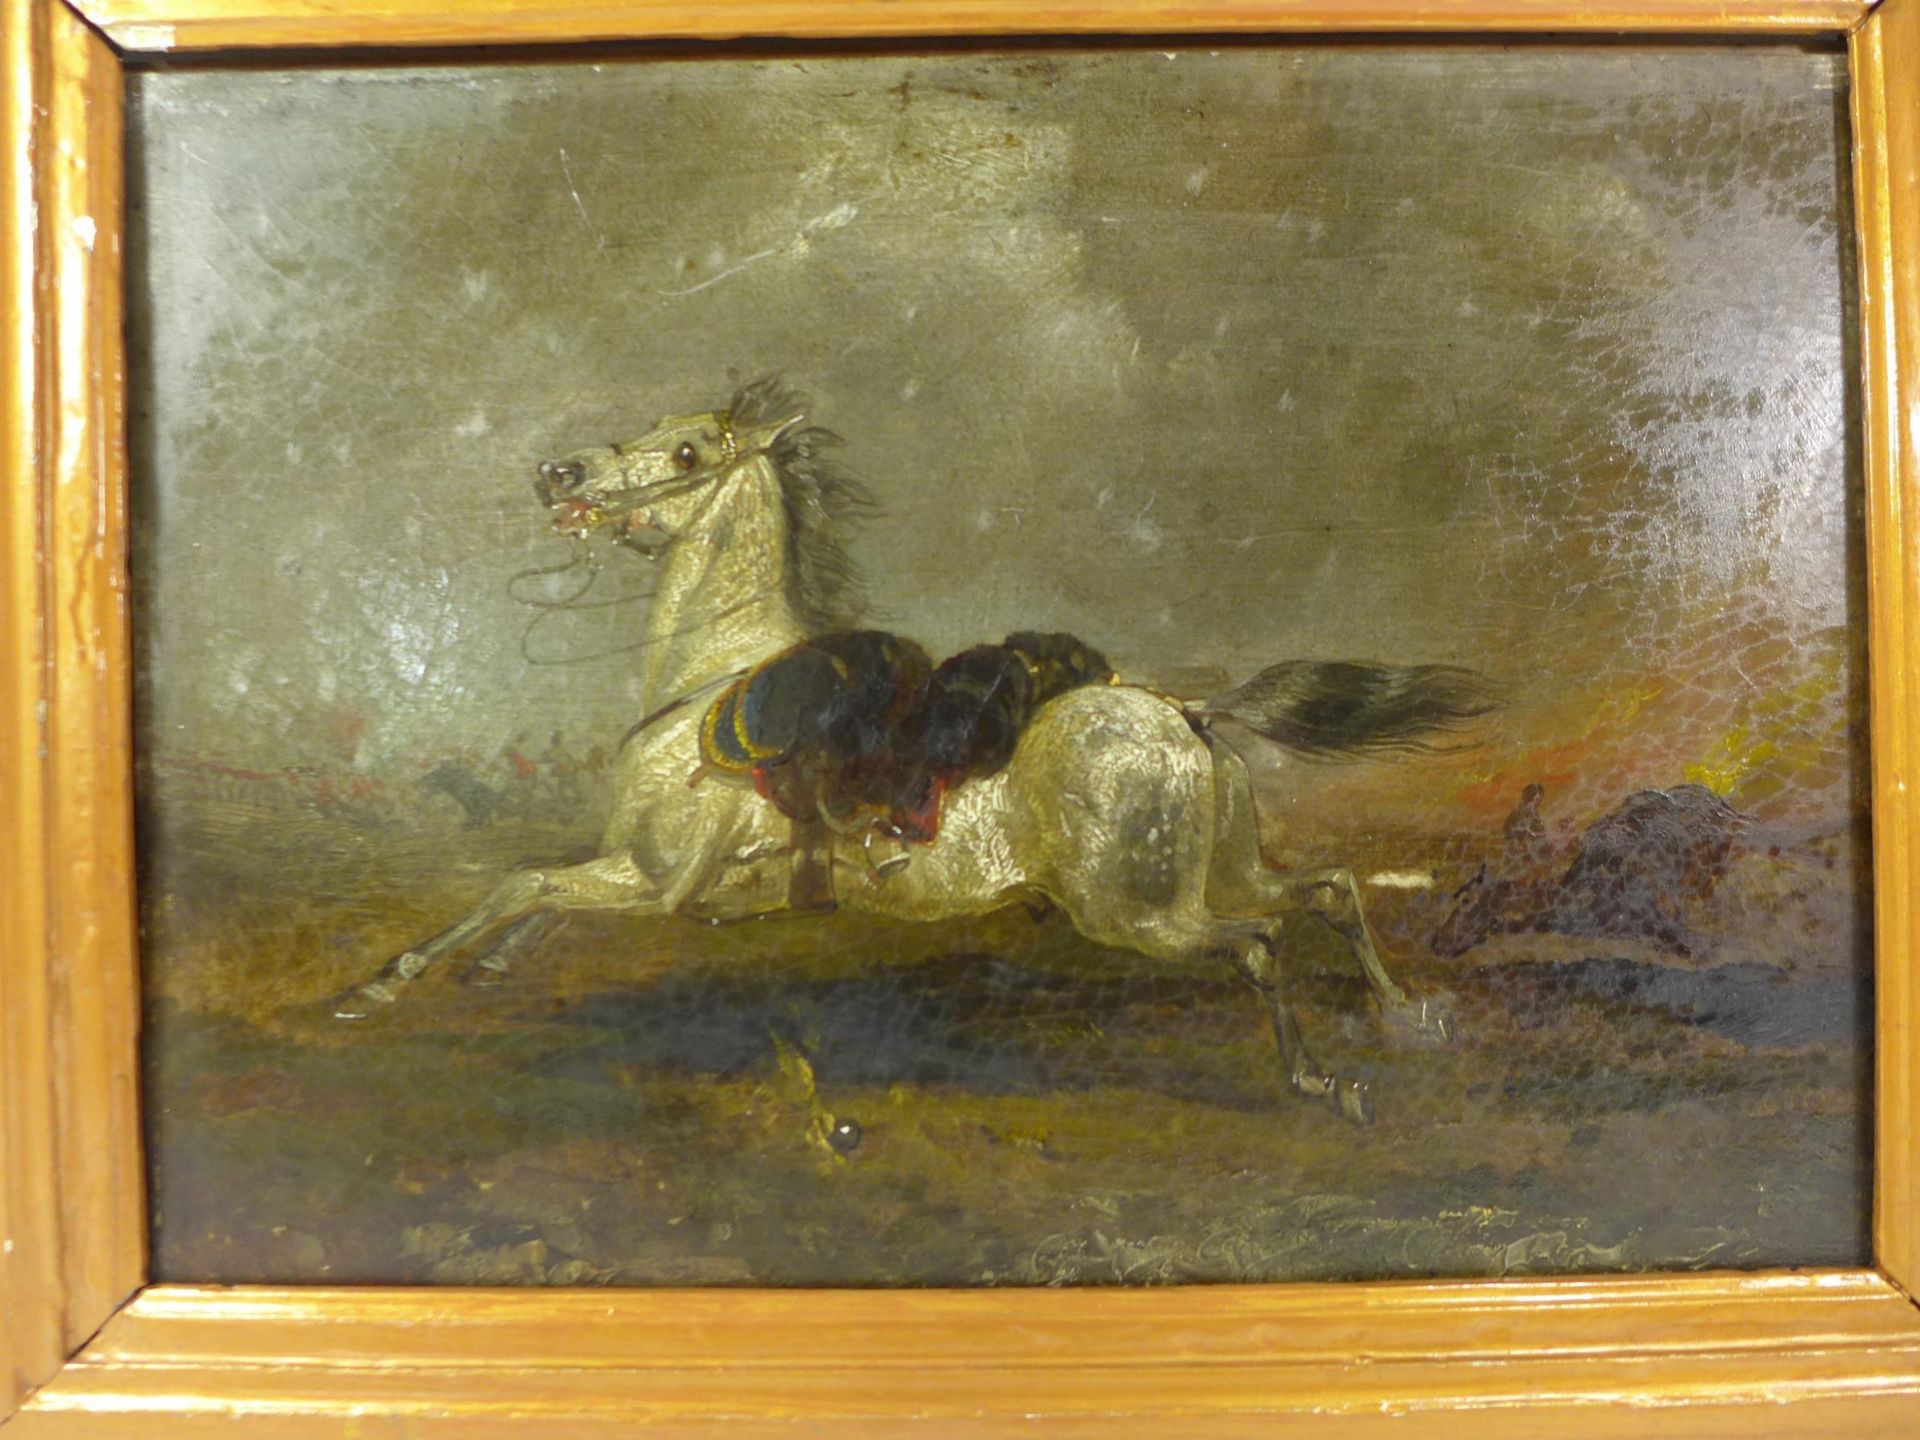 A 19TH CENTURY OIL ON PANEL PAINTING OF A GREY RIDERLESS HORSE IN A NAPOLEONIC WAR BATTLE SCENE, - Image 2 of 3